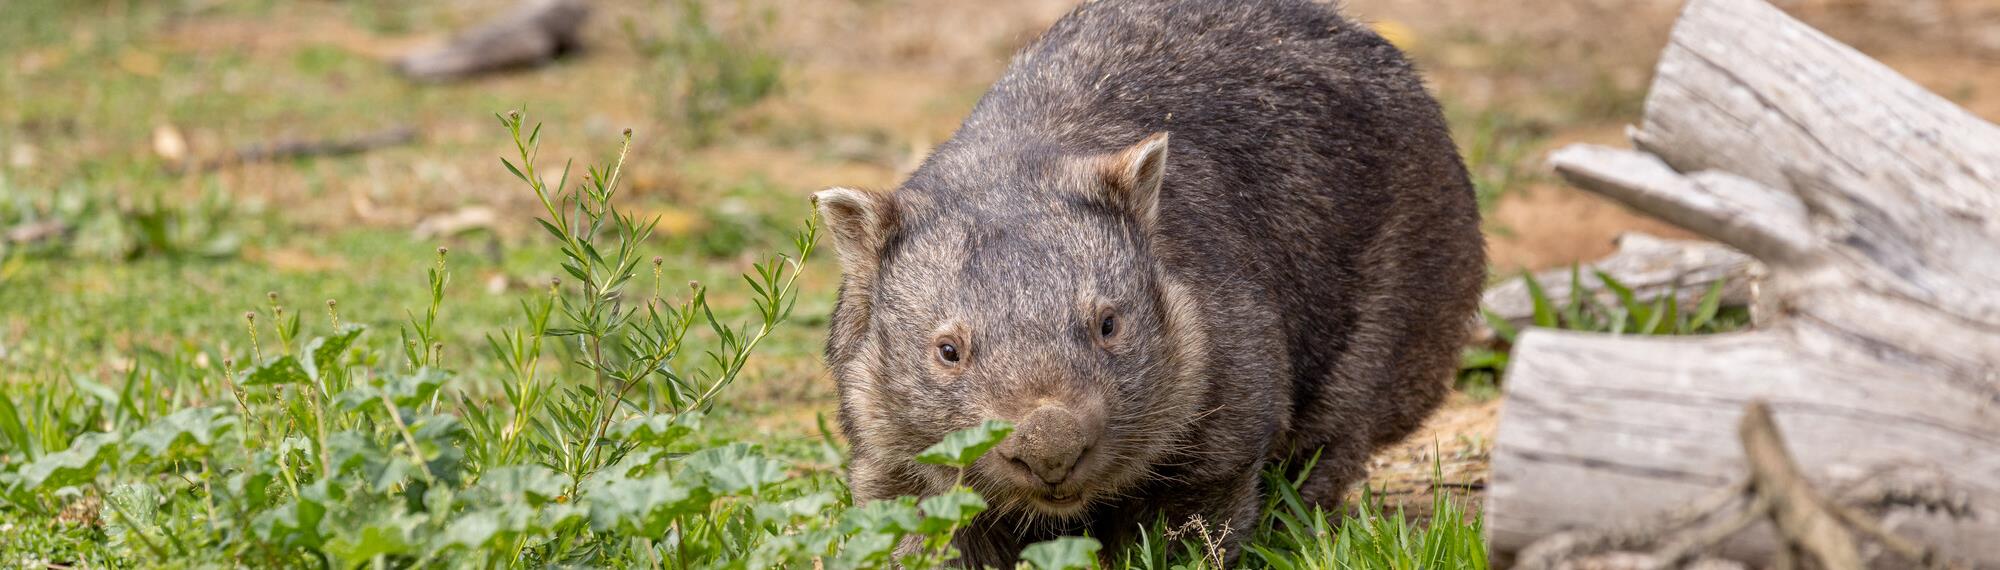 A brown wombat is walking across grass. There is a log next to the wombat.